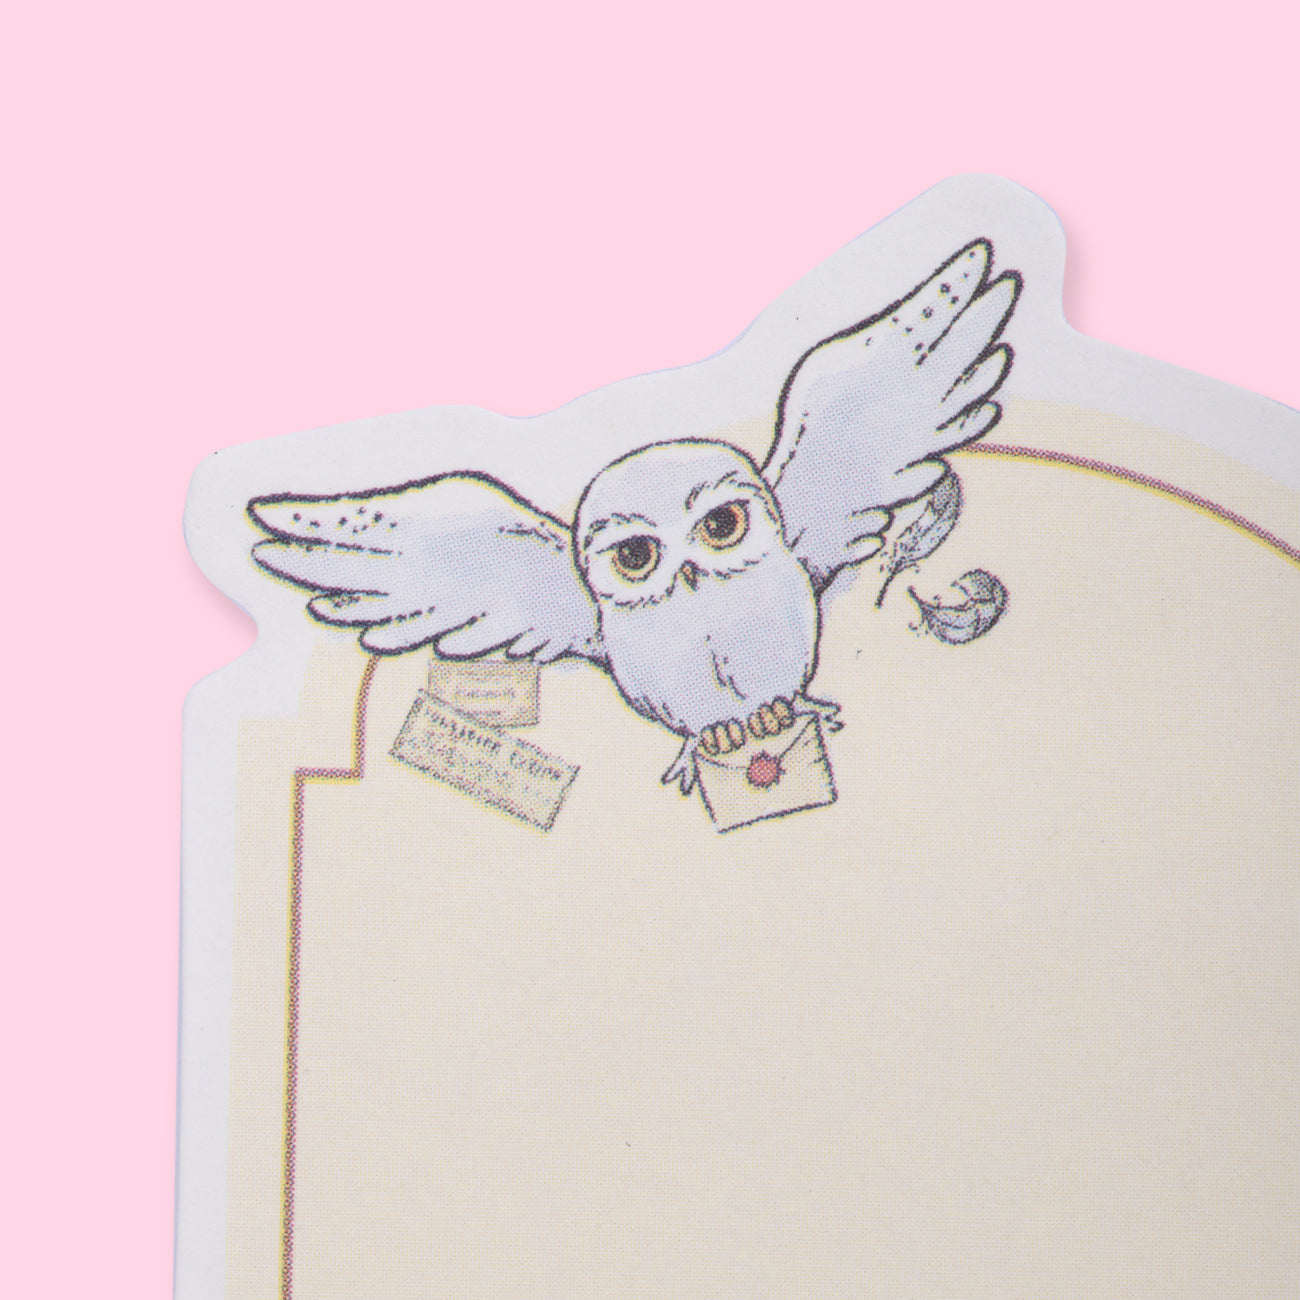 Harry Potter Limited Edition Sticky Notes - Magic Pigeon